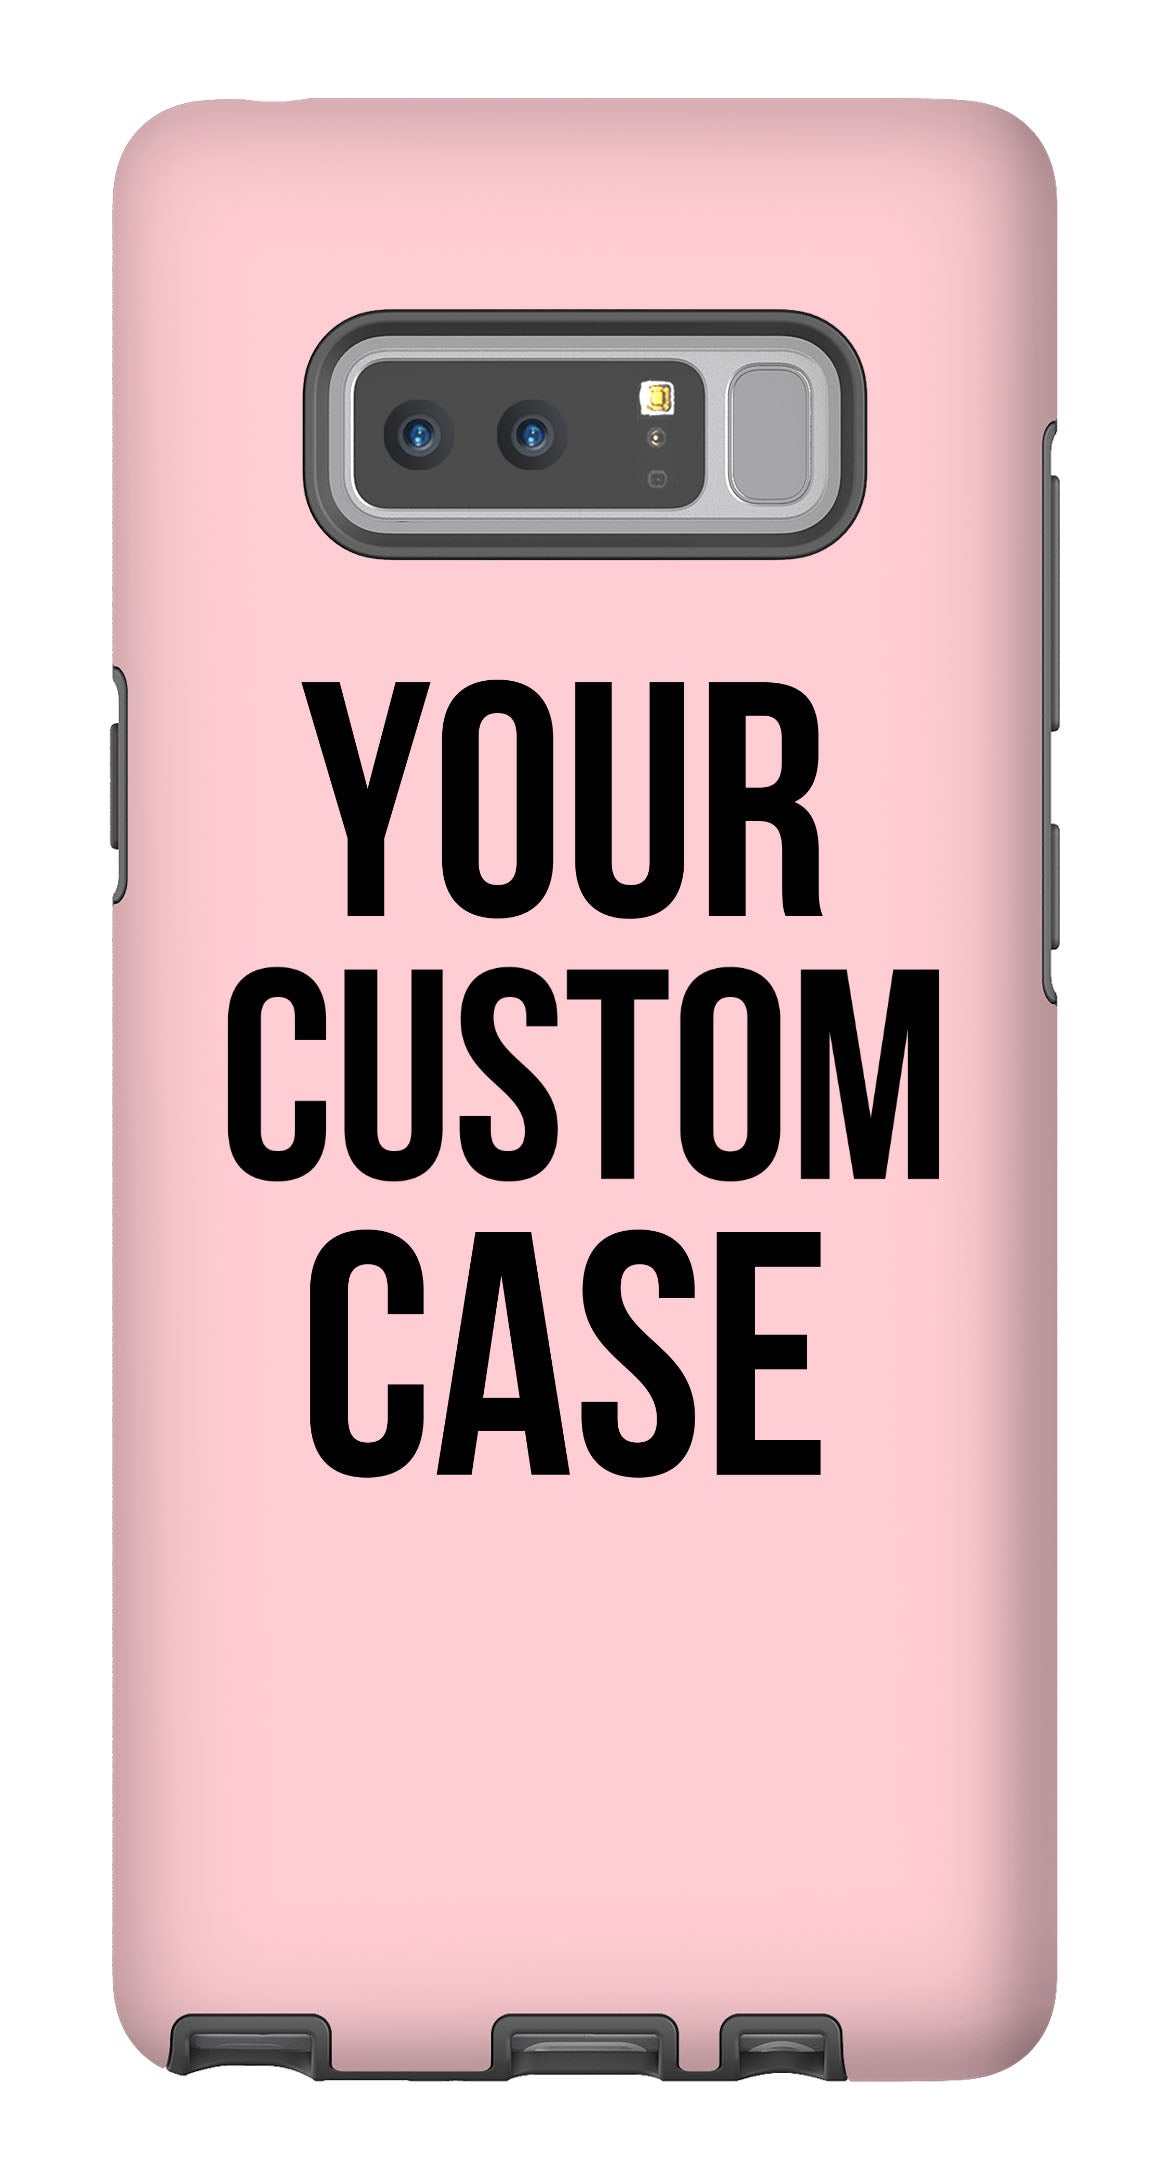 Custom Galaxy Note 8 Extra Protective Bumper Case - Your Custom Design in Cart will be Shipped - Pixly Case